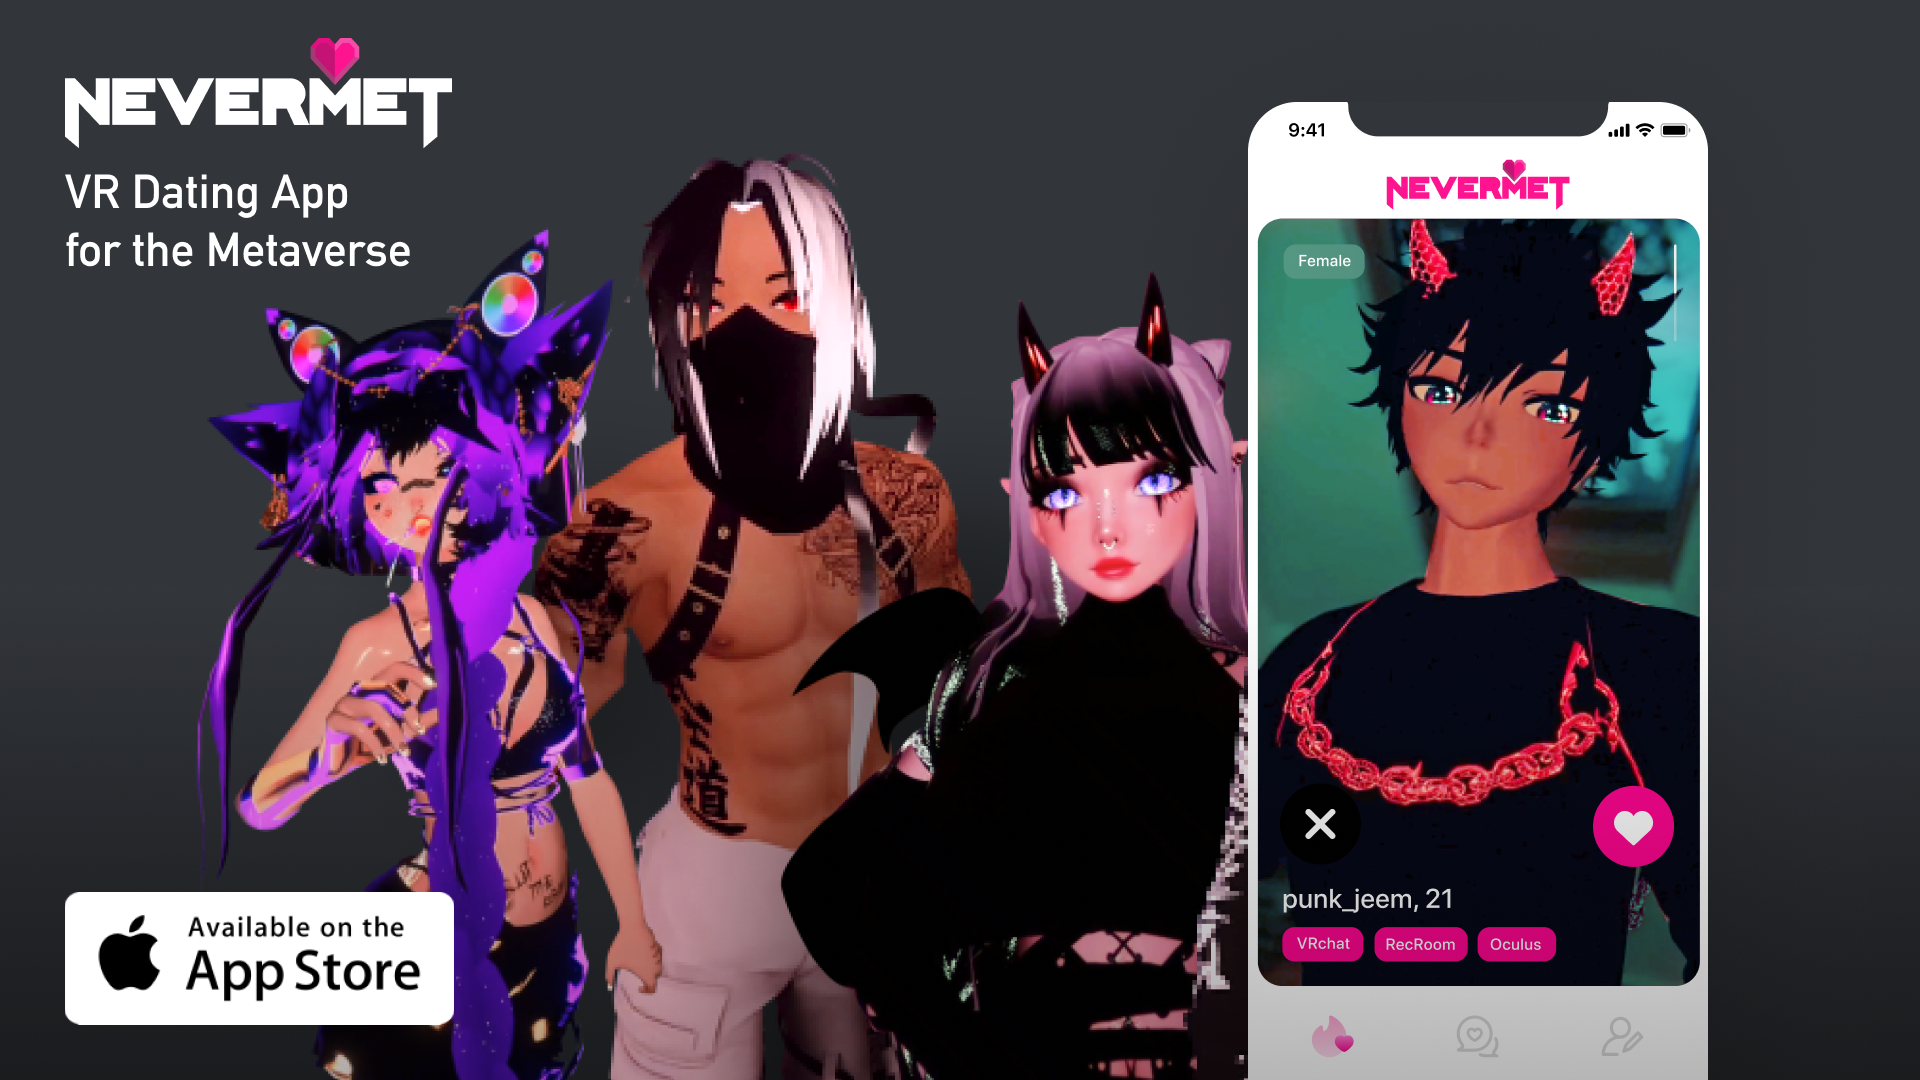 Find Virtual Love In The Metaverse With This Dating